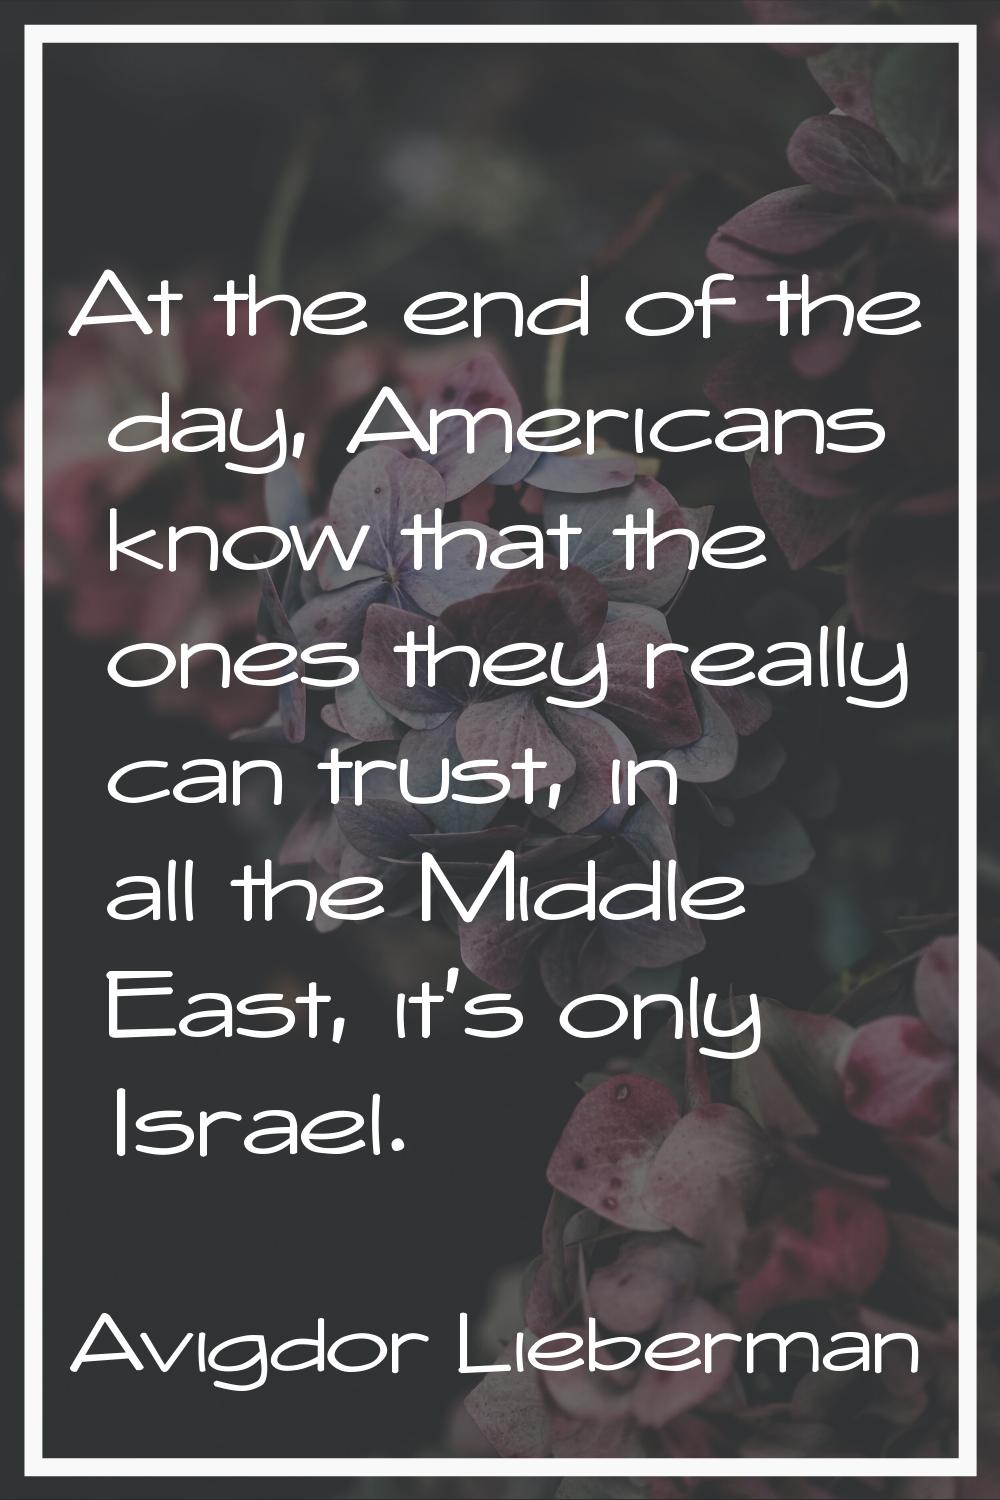 At the end of the day, Americans know that the ones they really can trust, in all the Middle East, 